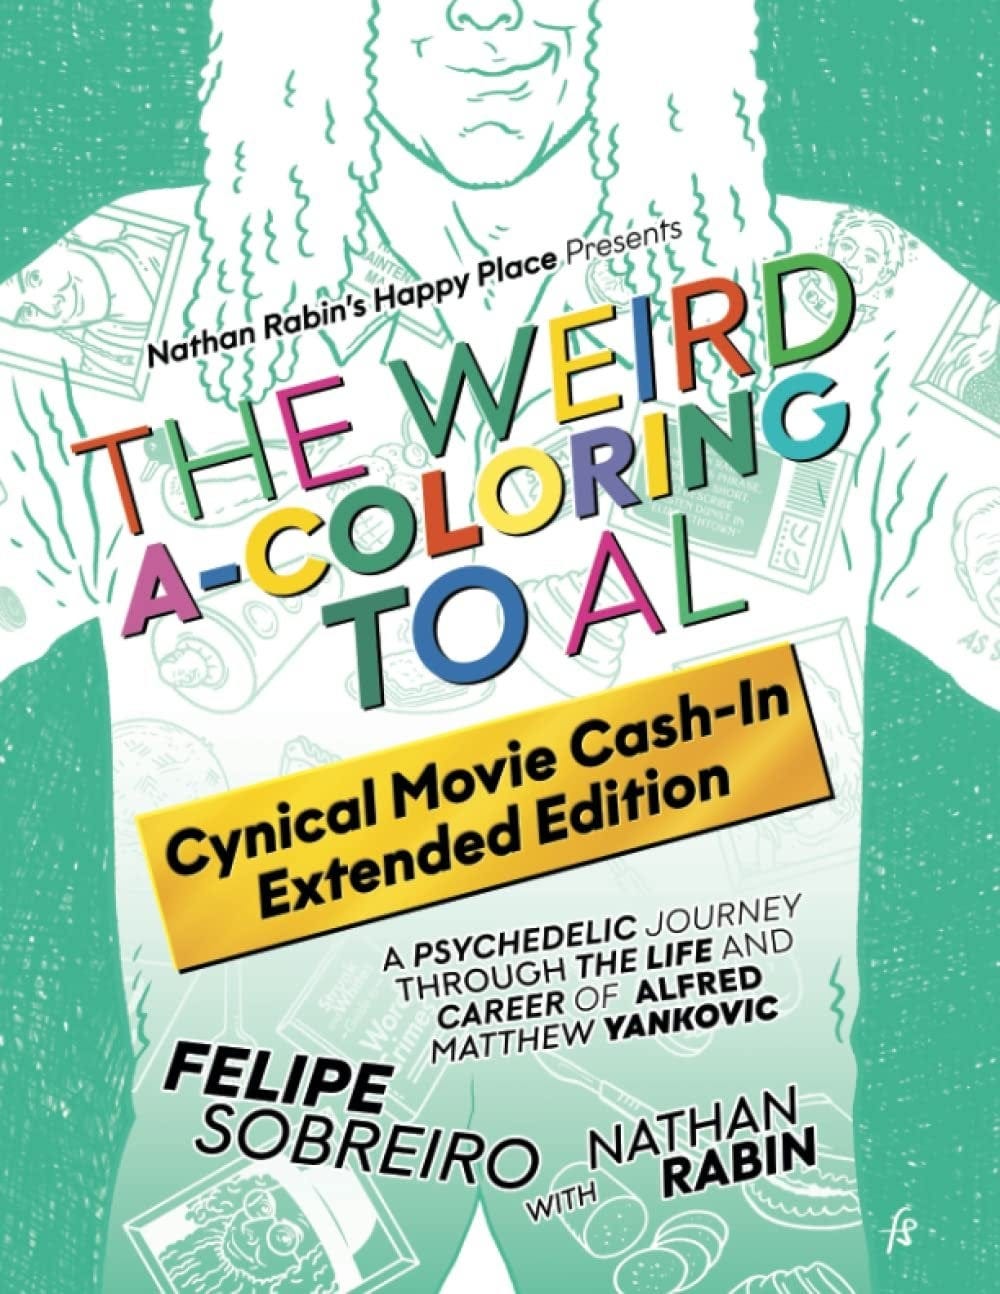 r/weirdal - The holiday season has finally arrived! Time to stock up on books about "Weird Al" Yankovic! (that I've written)